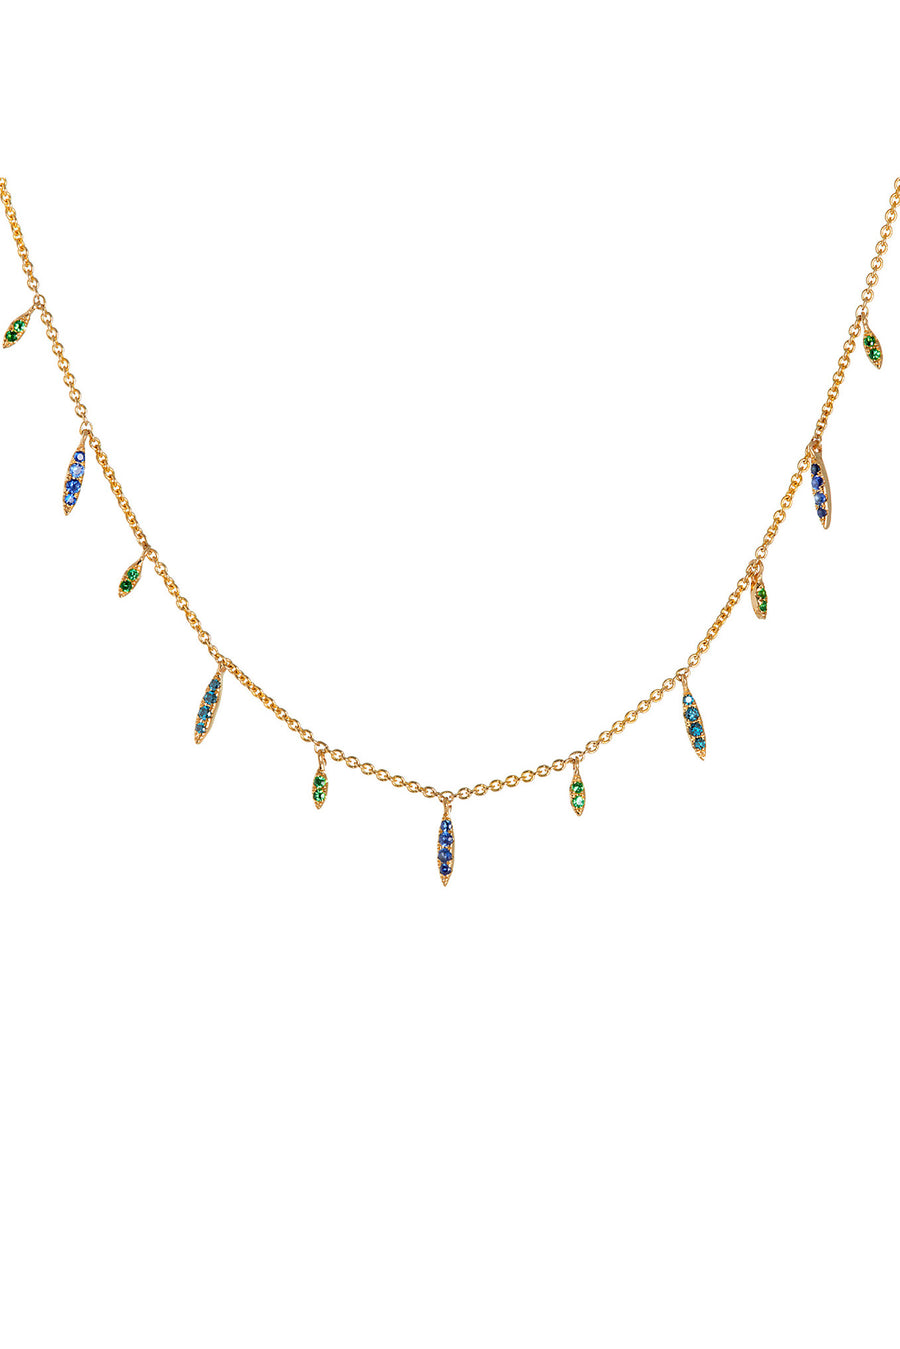 Multi-diamond dangle necklace in 14k gold and blue and green sapphires